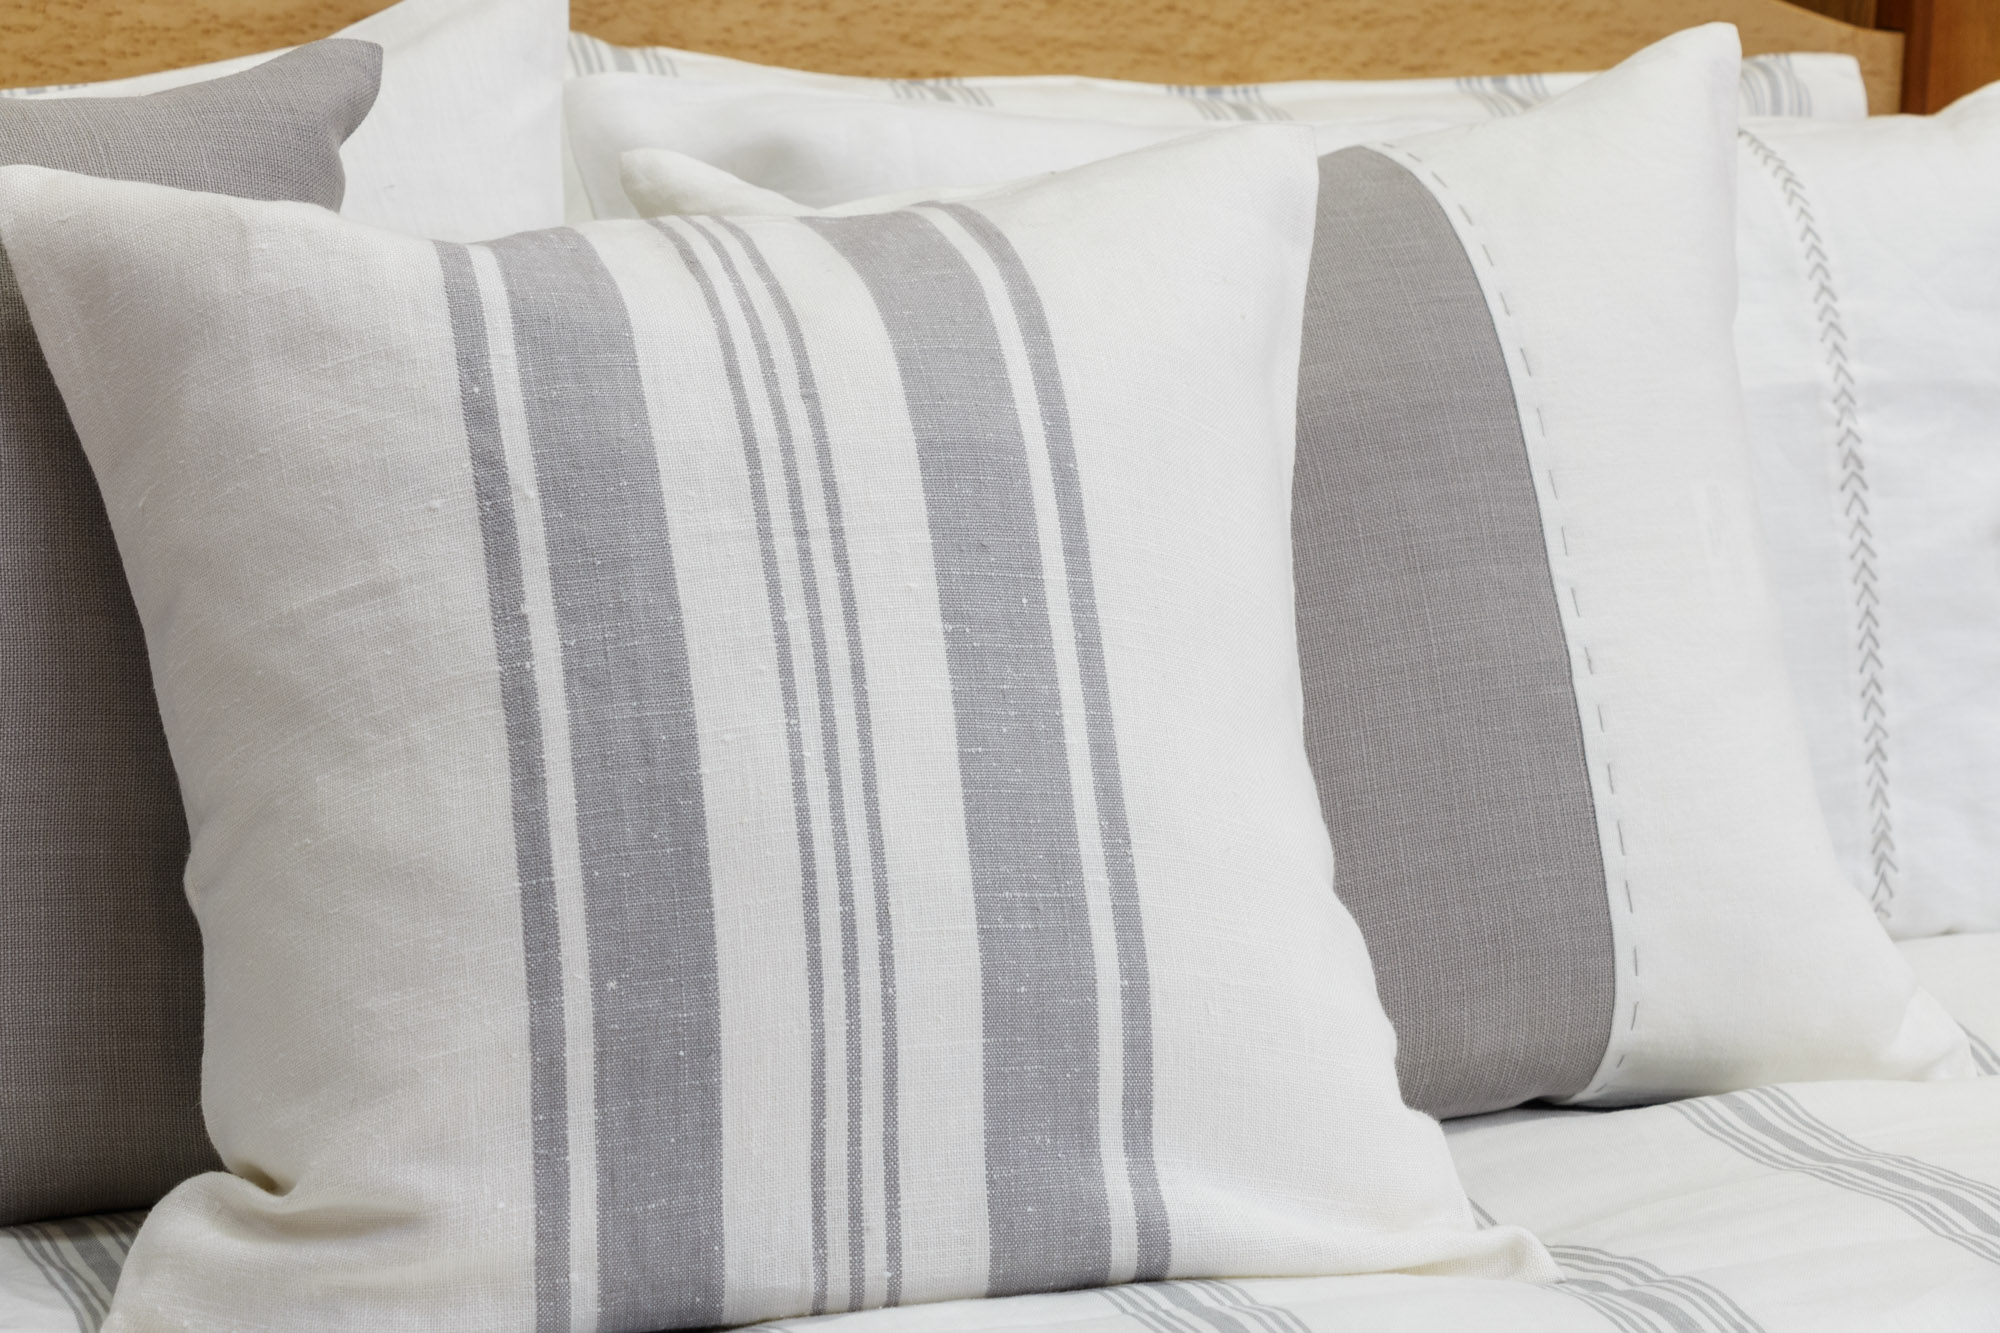 three different striped pillows sitting on a bed